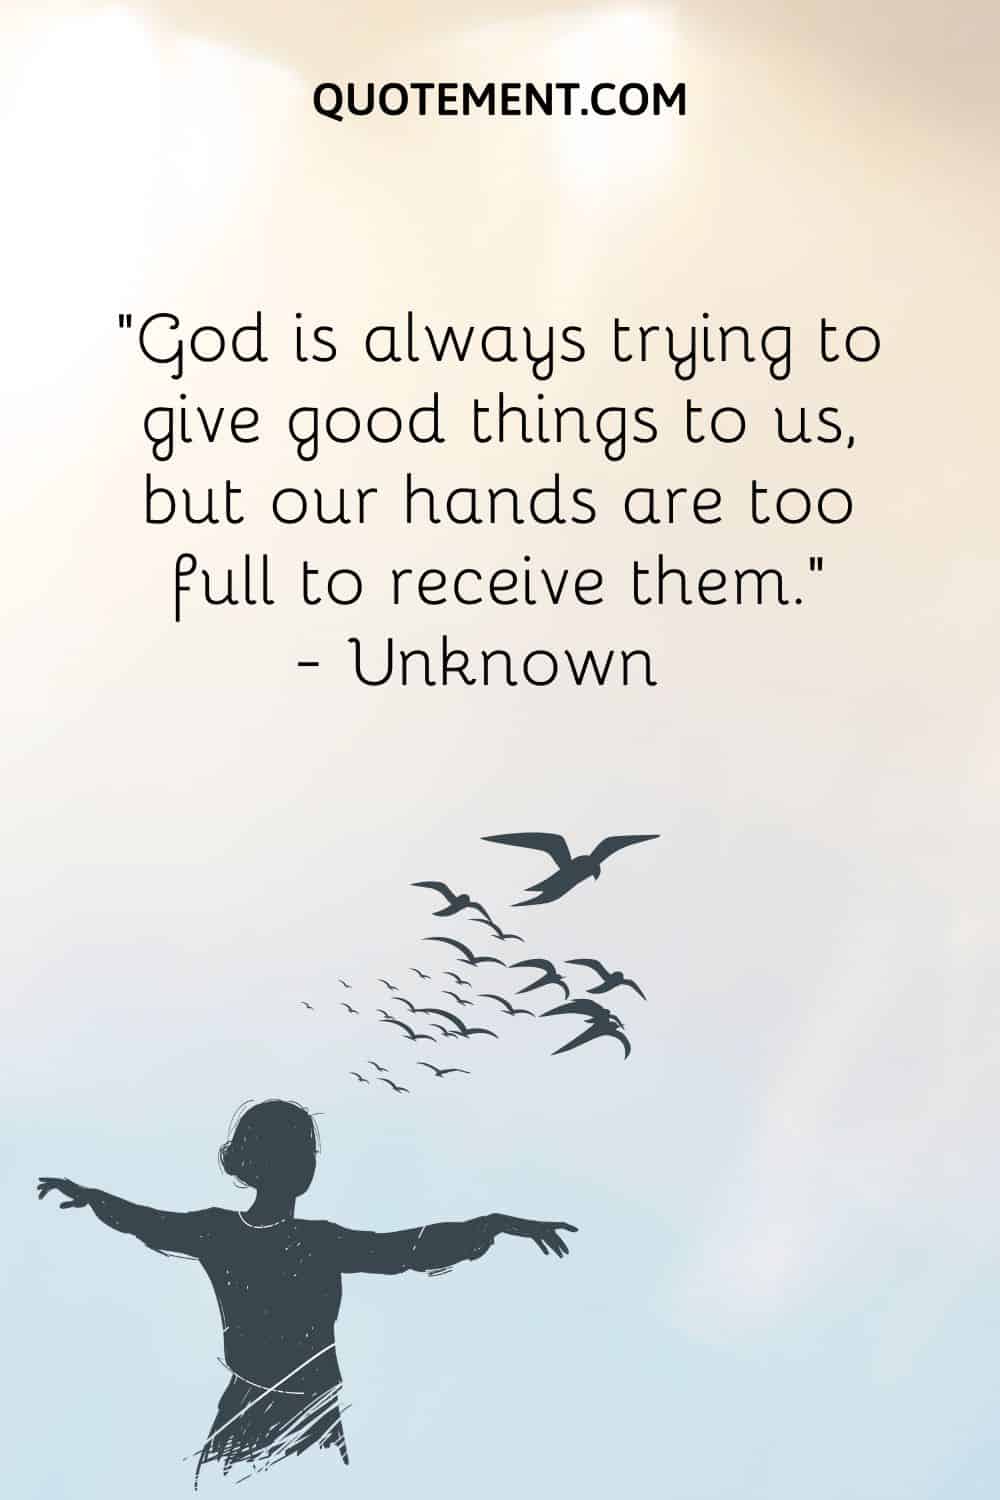 “God is always trying to give good things to us, but our hands are too full to receive them.” — Unknown